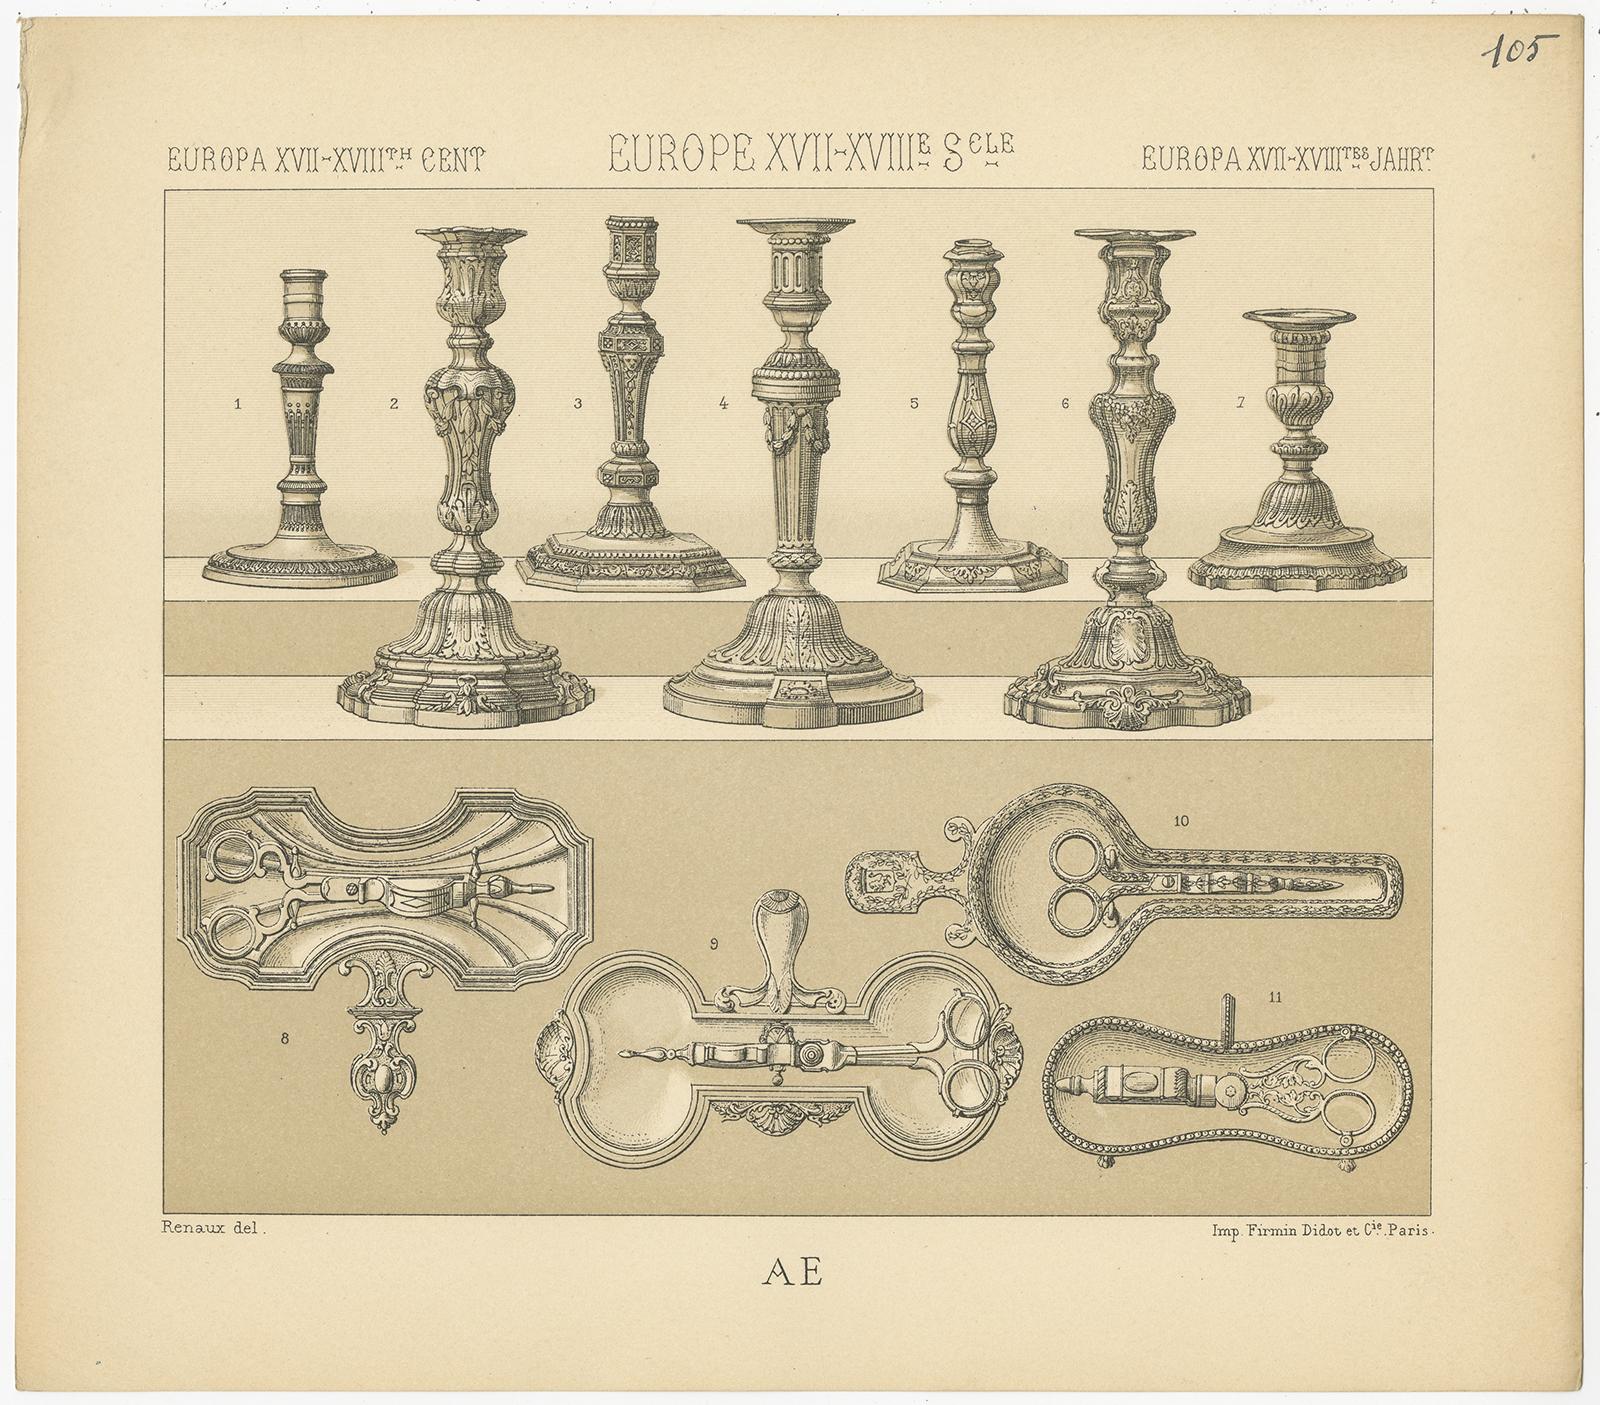 Antique print titled 'Europa XVII, XVIIIth Cent - Europe XVII, XVIIIe Sele - Europa XVII, XVIIItes Jahr'. Chromolithograph of European 17th-18th century objects. This print originates from 'Le Costume Historique' by M.A. Racinet. Published circa